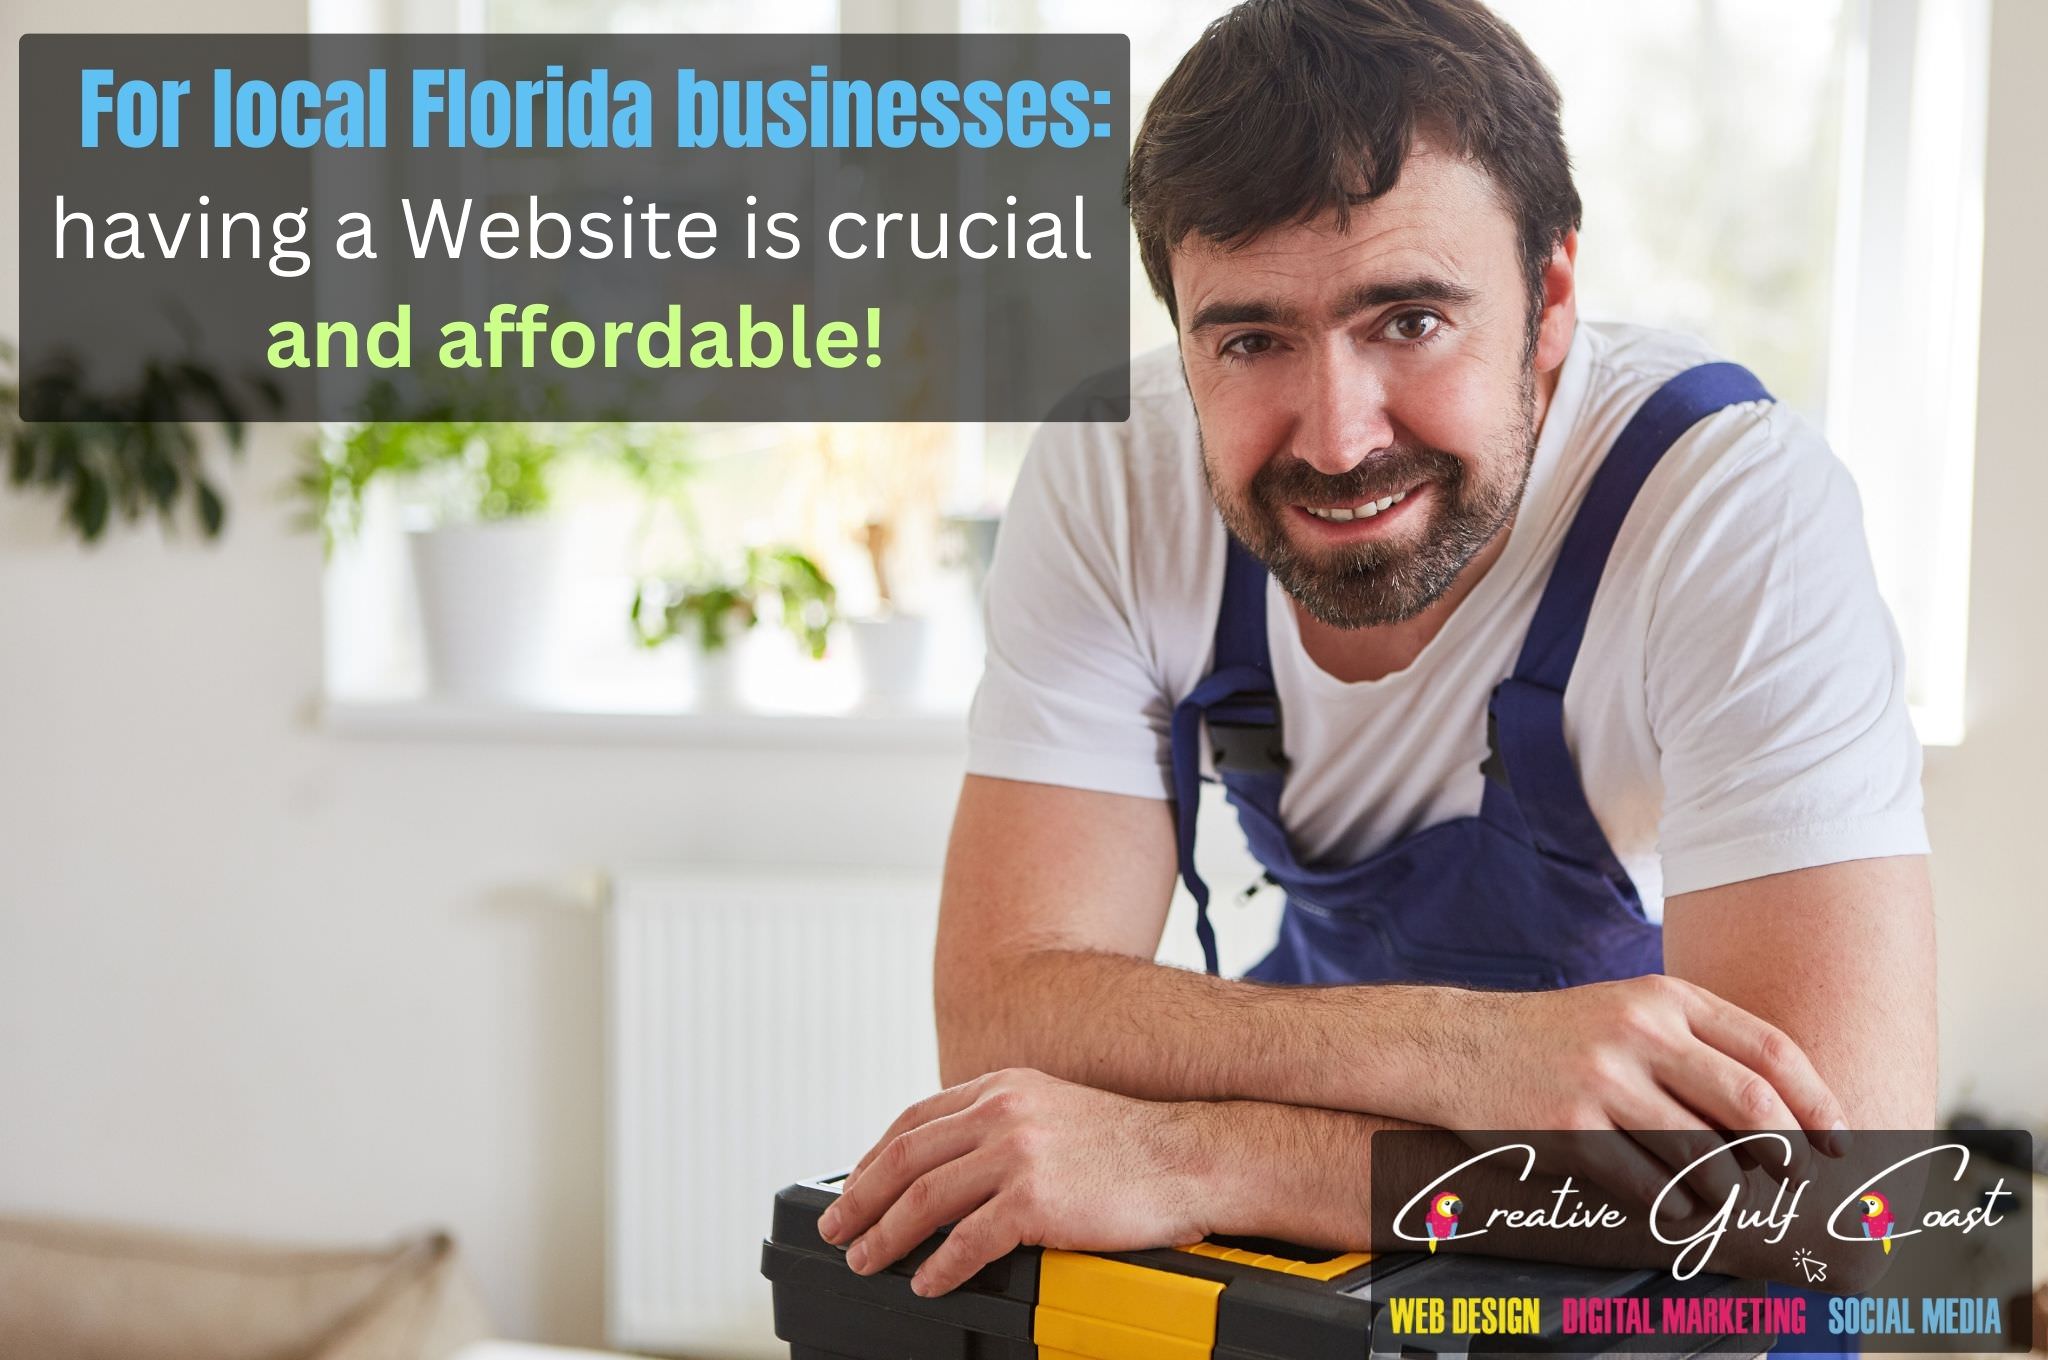 Affordable Websites for local businesses in Florida and Tampa Bay Area, Sarasota, Clearwater. Creative Gulf Coast Marketing